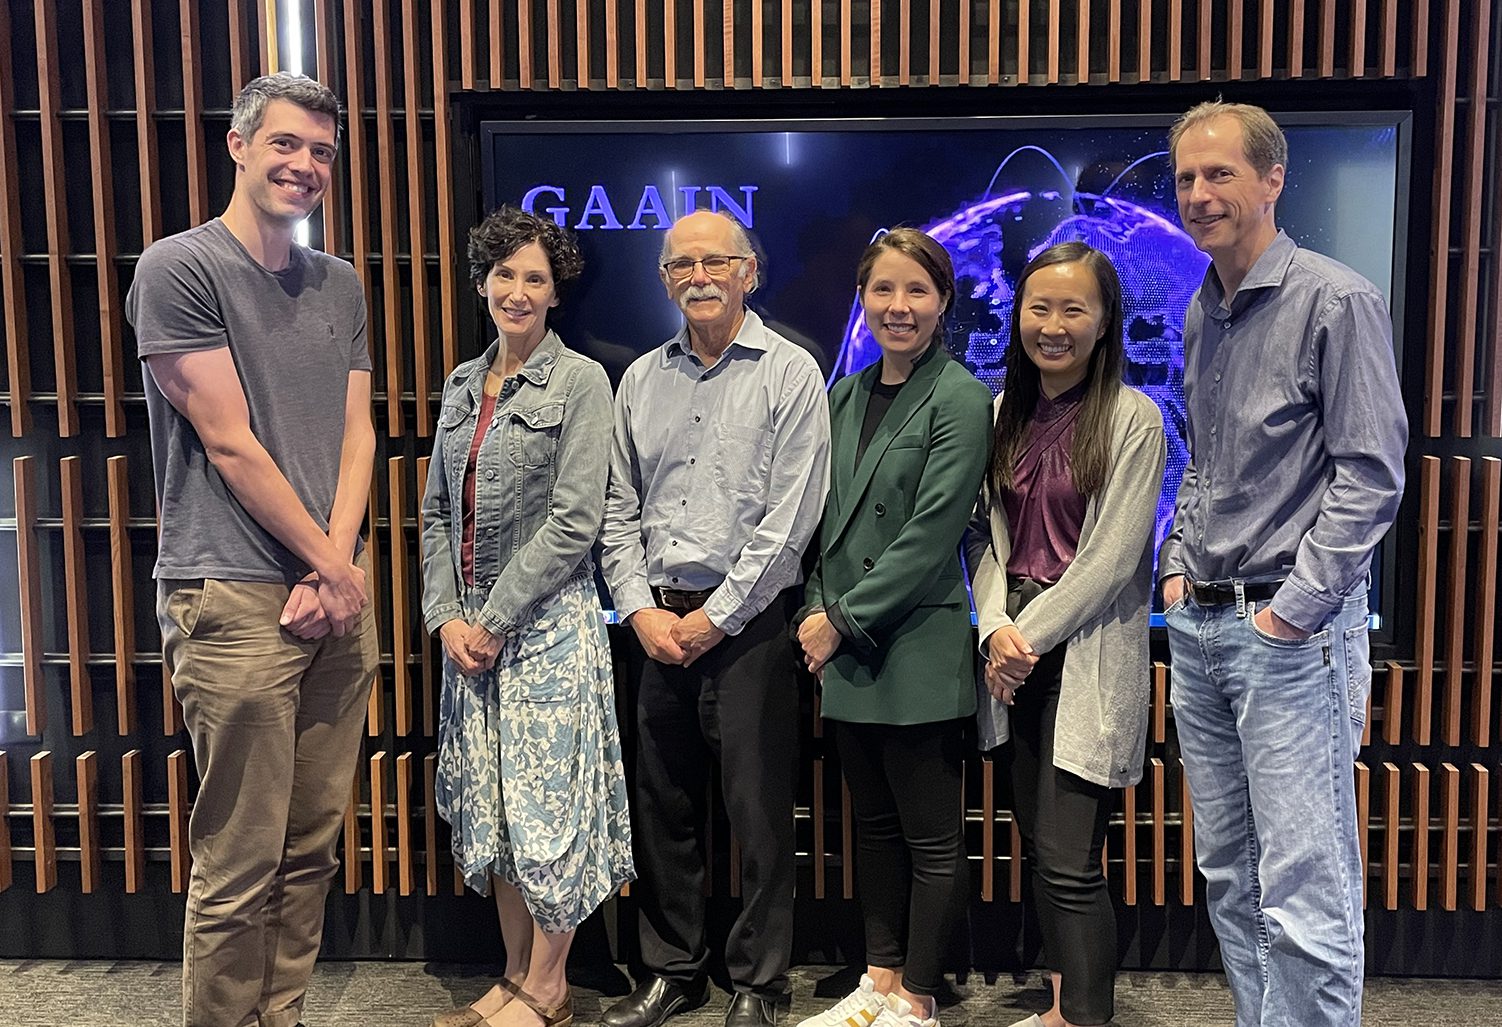 The GAAIN team, (L-R) Ioannis Pappas, PhD, Assistant Professor, Karen Crawford, MIS Manager, Arthur W. Toga, PhD, Director, Sidney Taiko Sheehan, Communications Manager, Cally Xiao, PhD, Project Specialist, Scott Neu, PhD, Assistant Professor